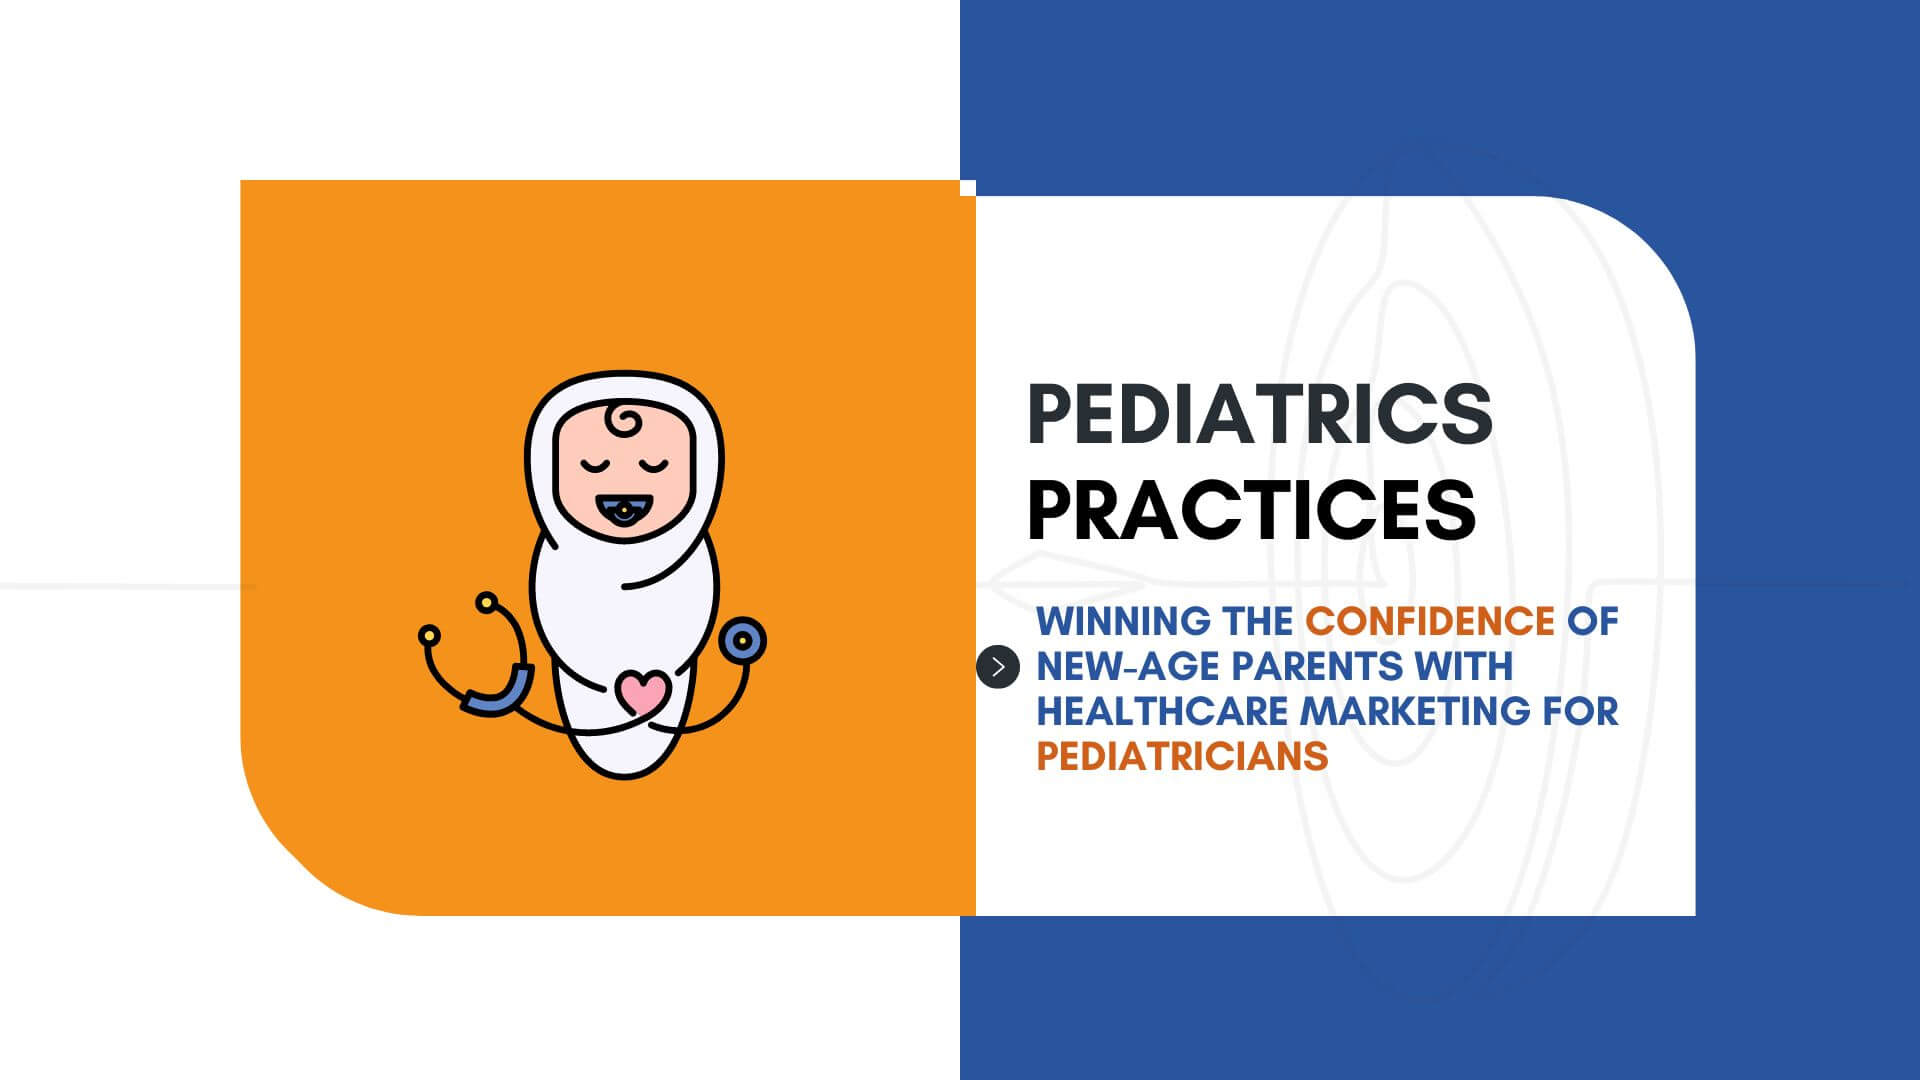 Winning The Confidence Of New-age Parents With Healthcare Marketing For Pediatricians